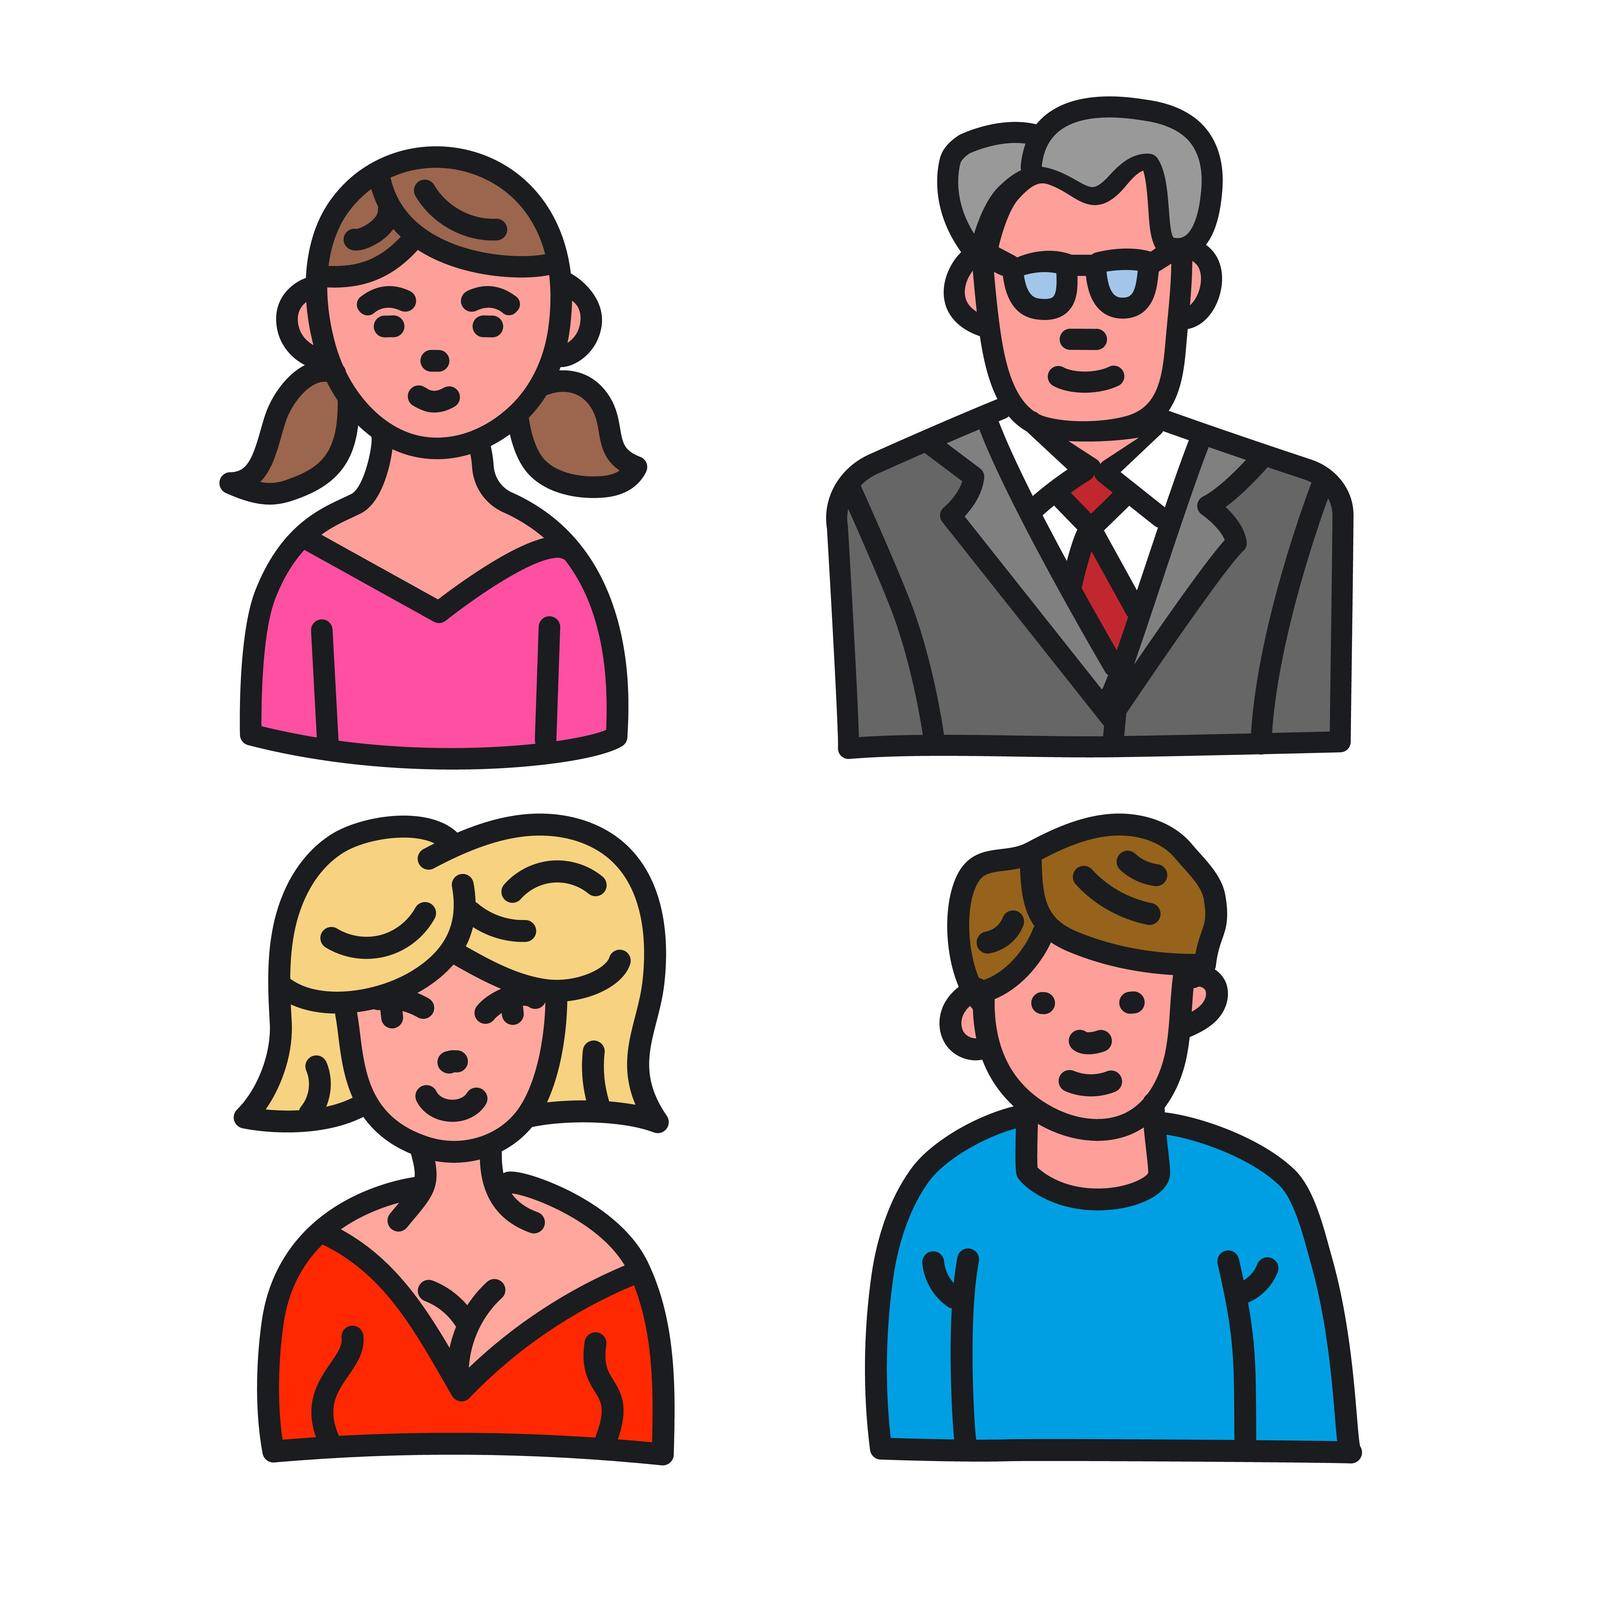 illustration of the family character avatars colorful icons on the white background